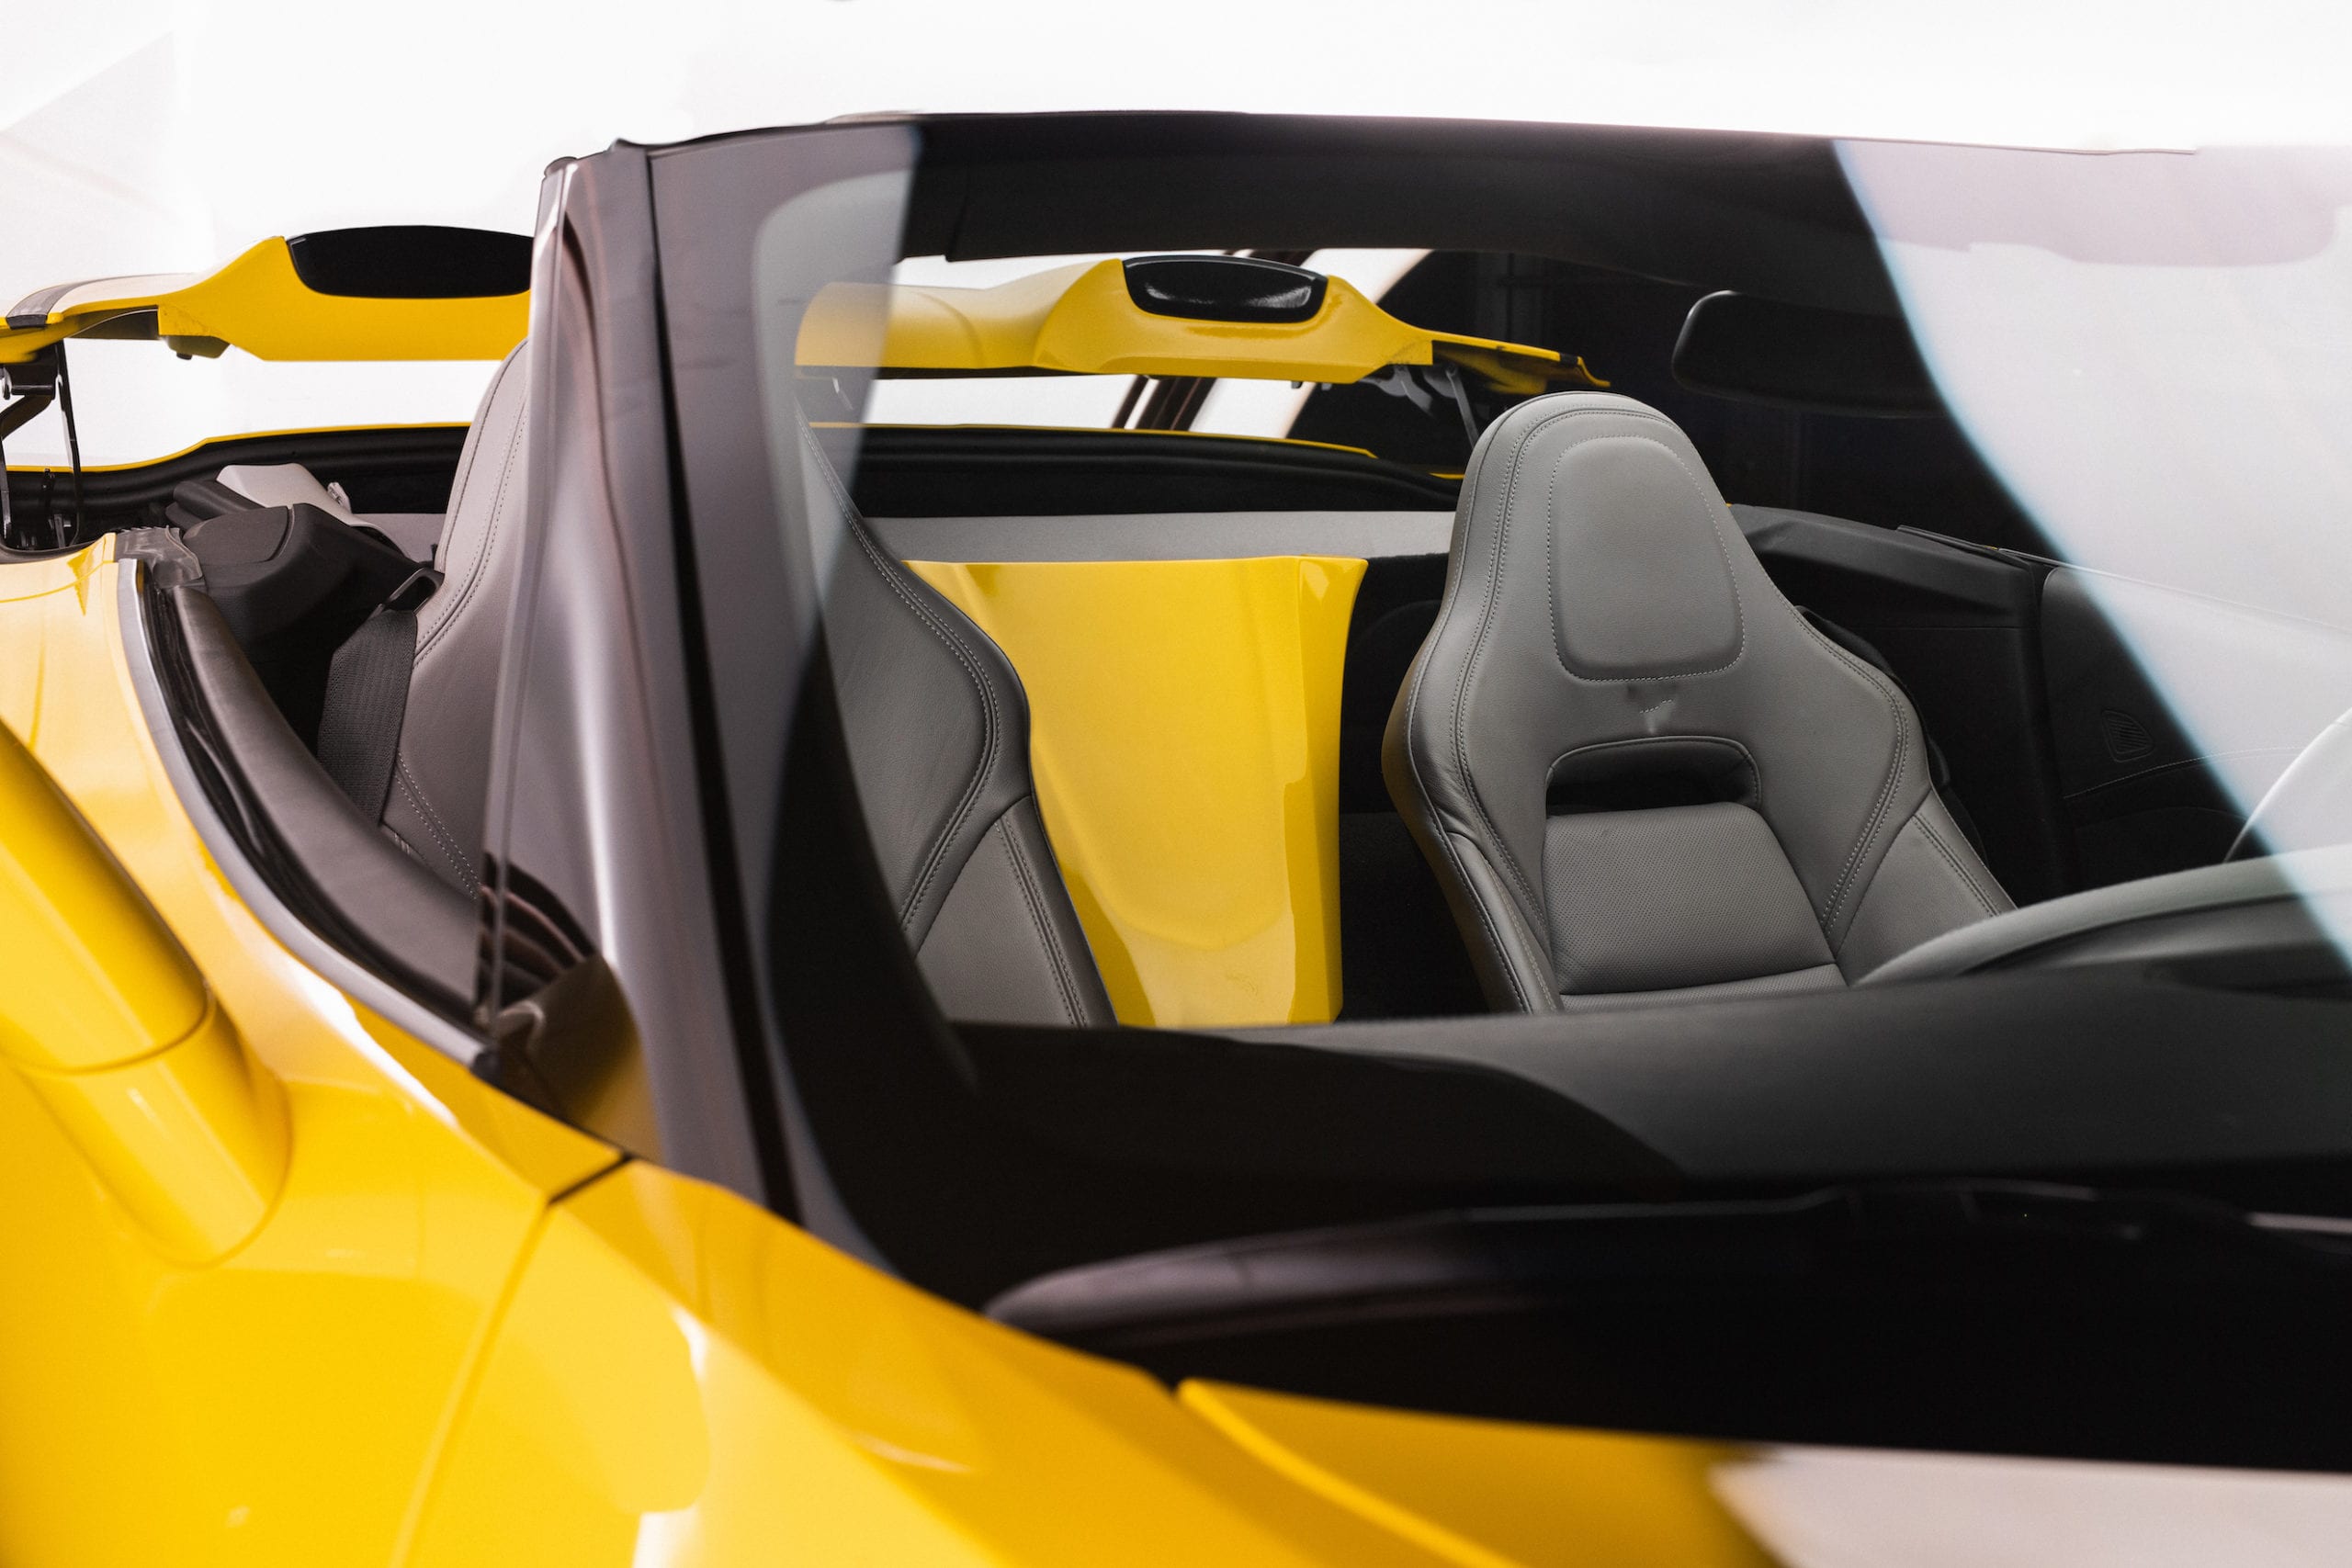 Interior of a yellow sports car with black leather